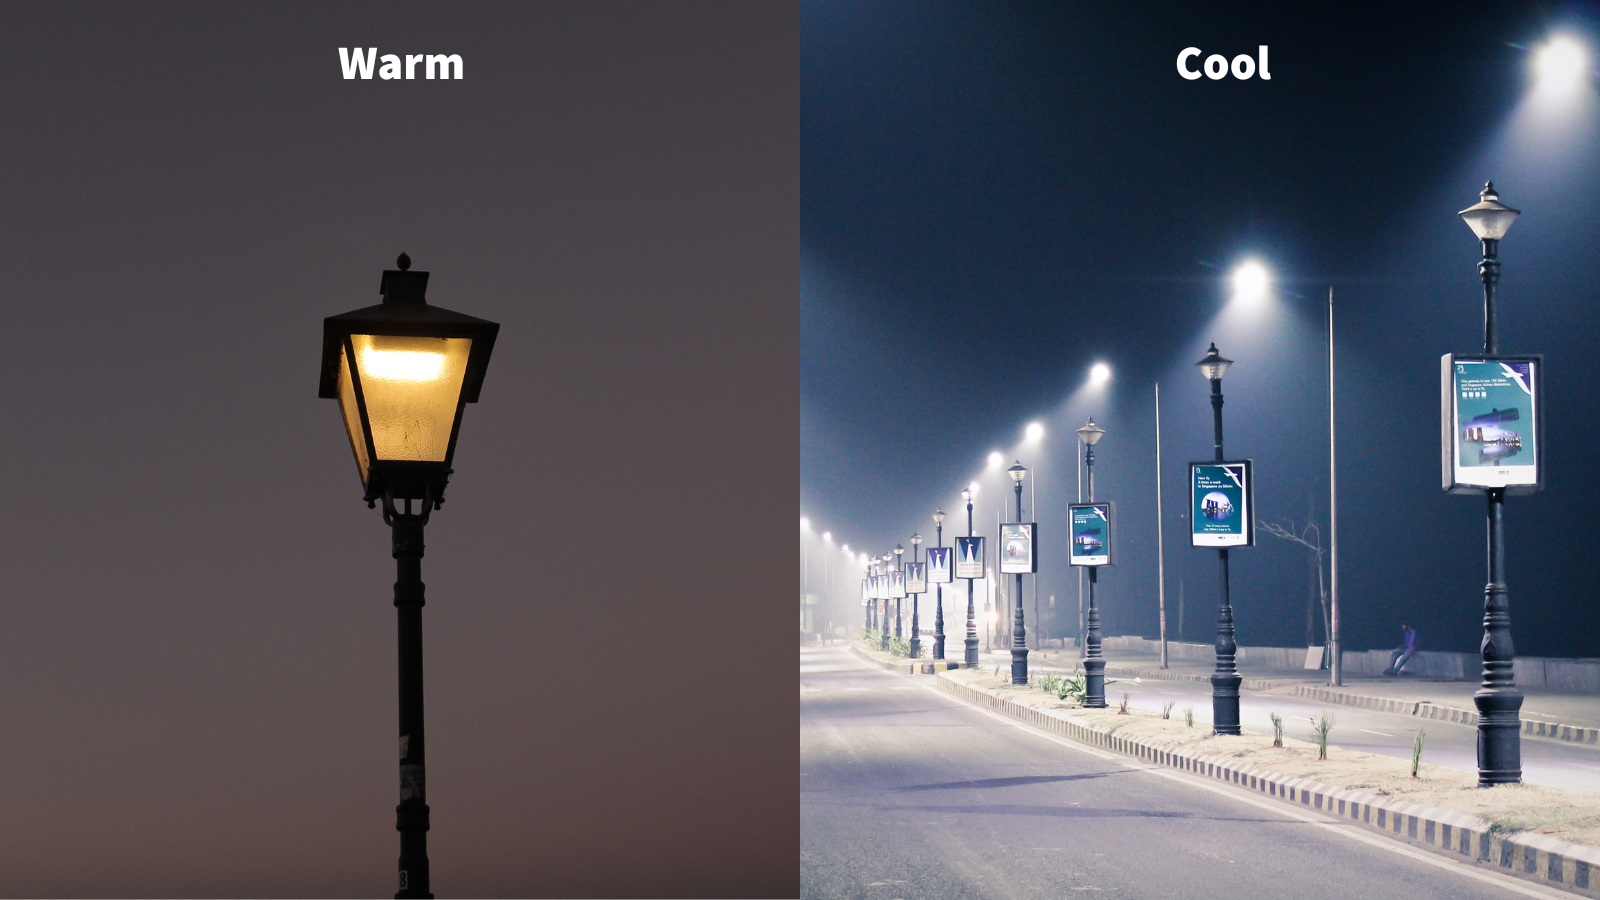 Examples of warm and cool streetlighting